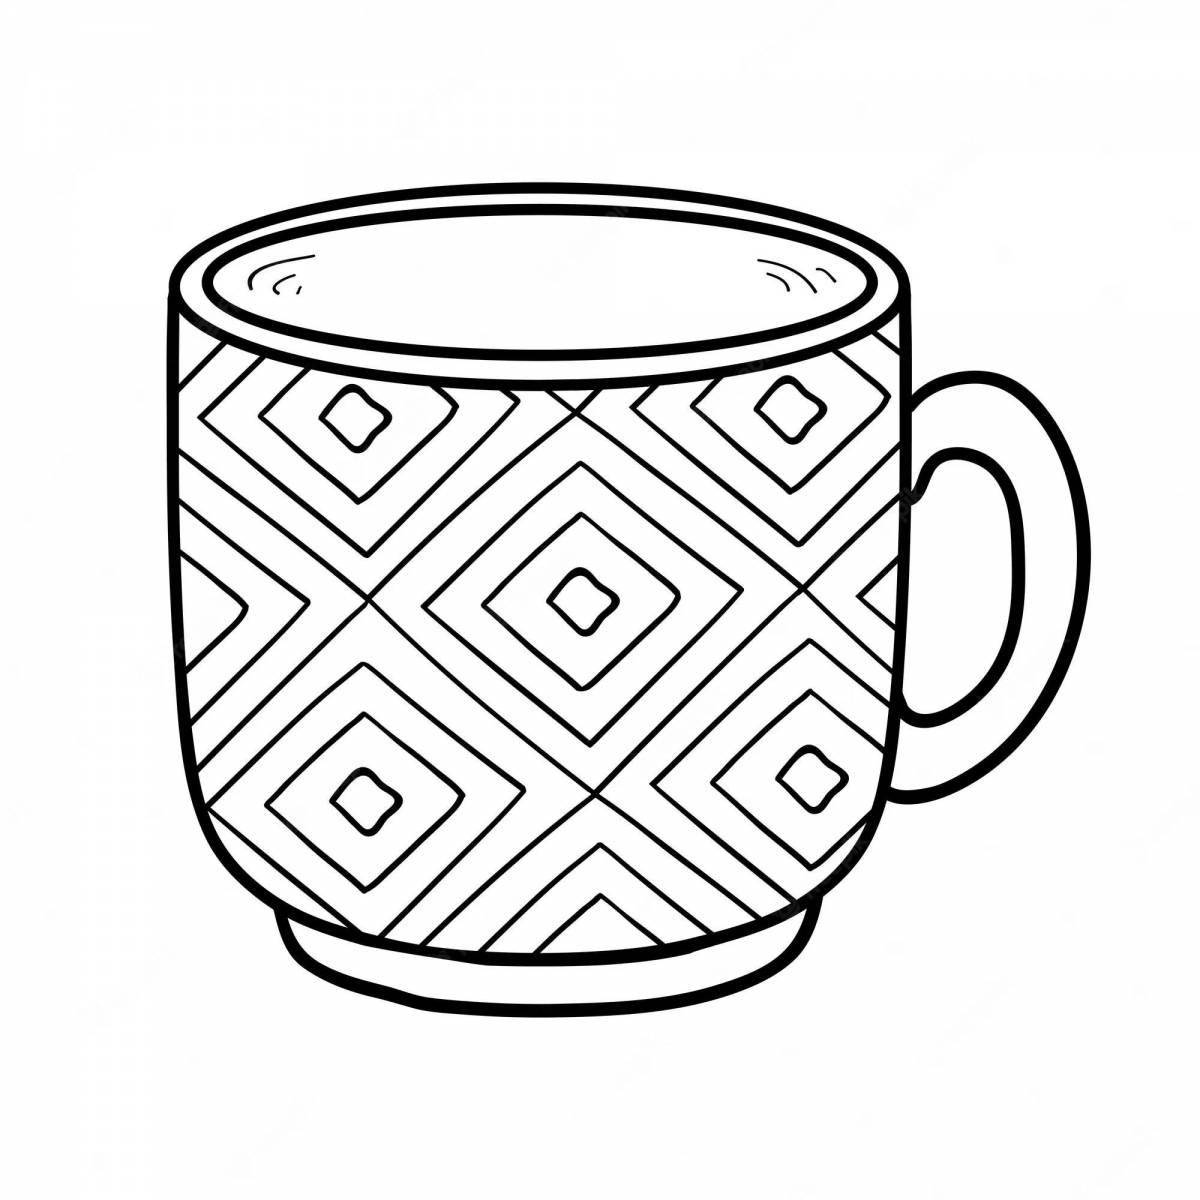 Adorable coloring cup for kids